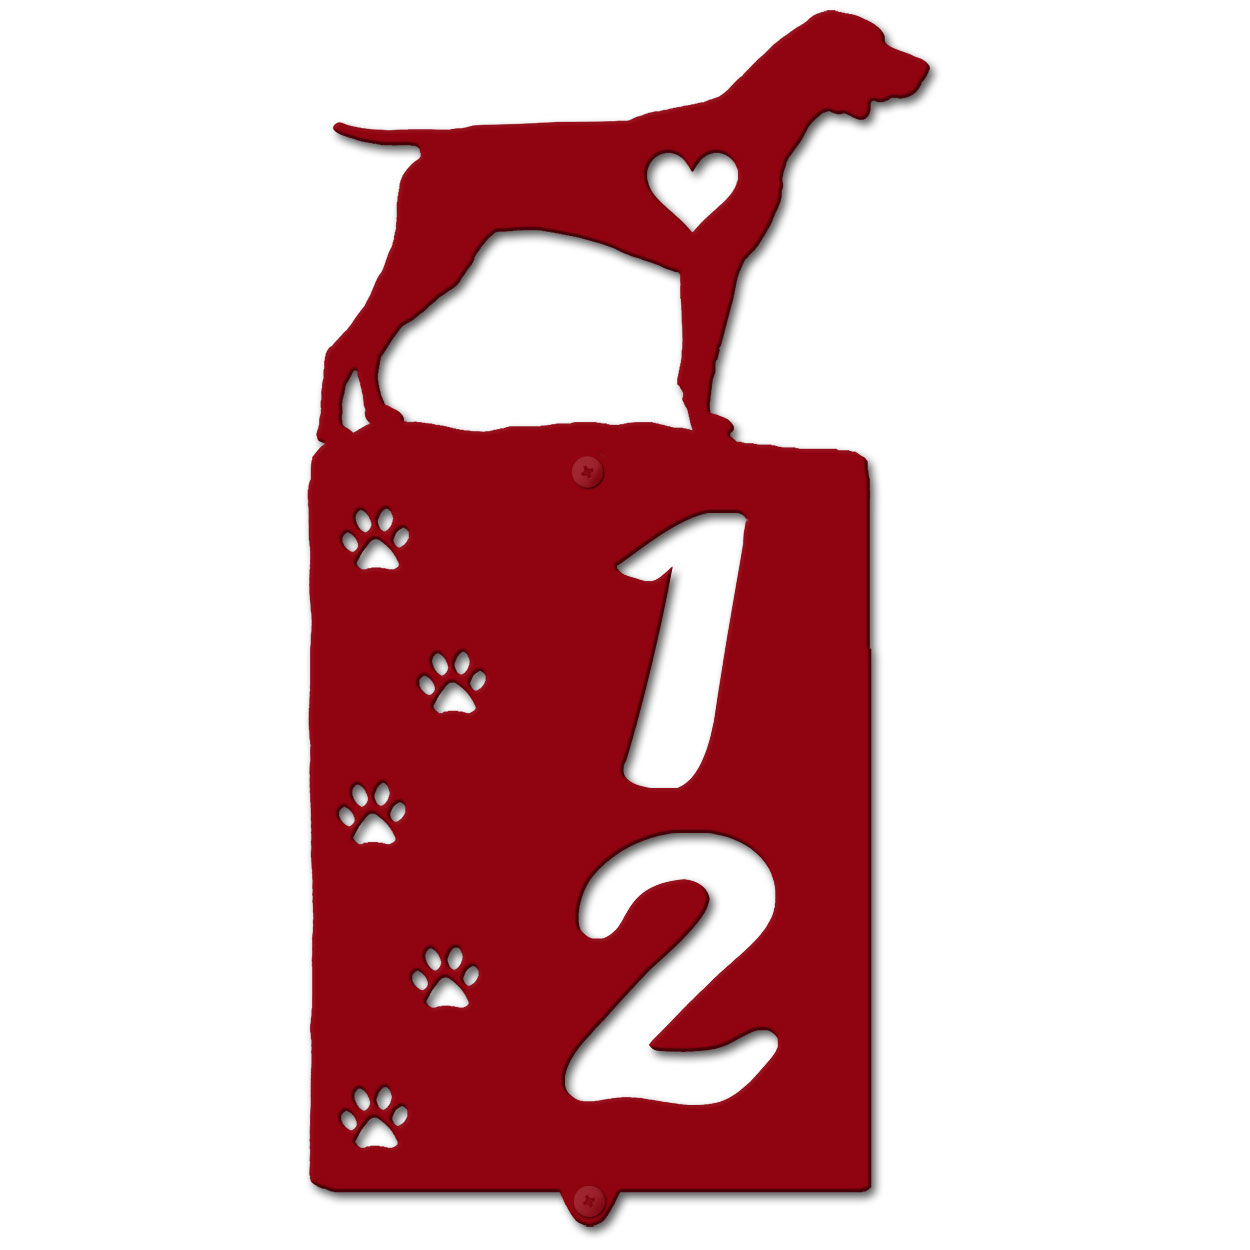 636282 - German Shorthaired Pointer Cut-Outs Two Digit Address Number Plaque - Choose Size and Color